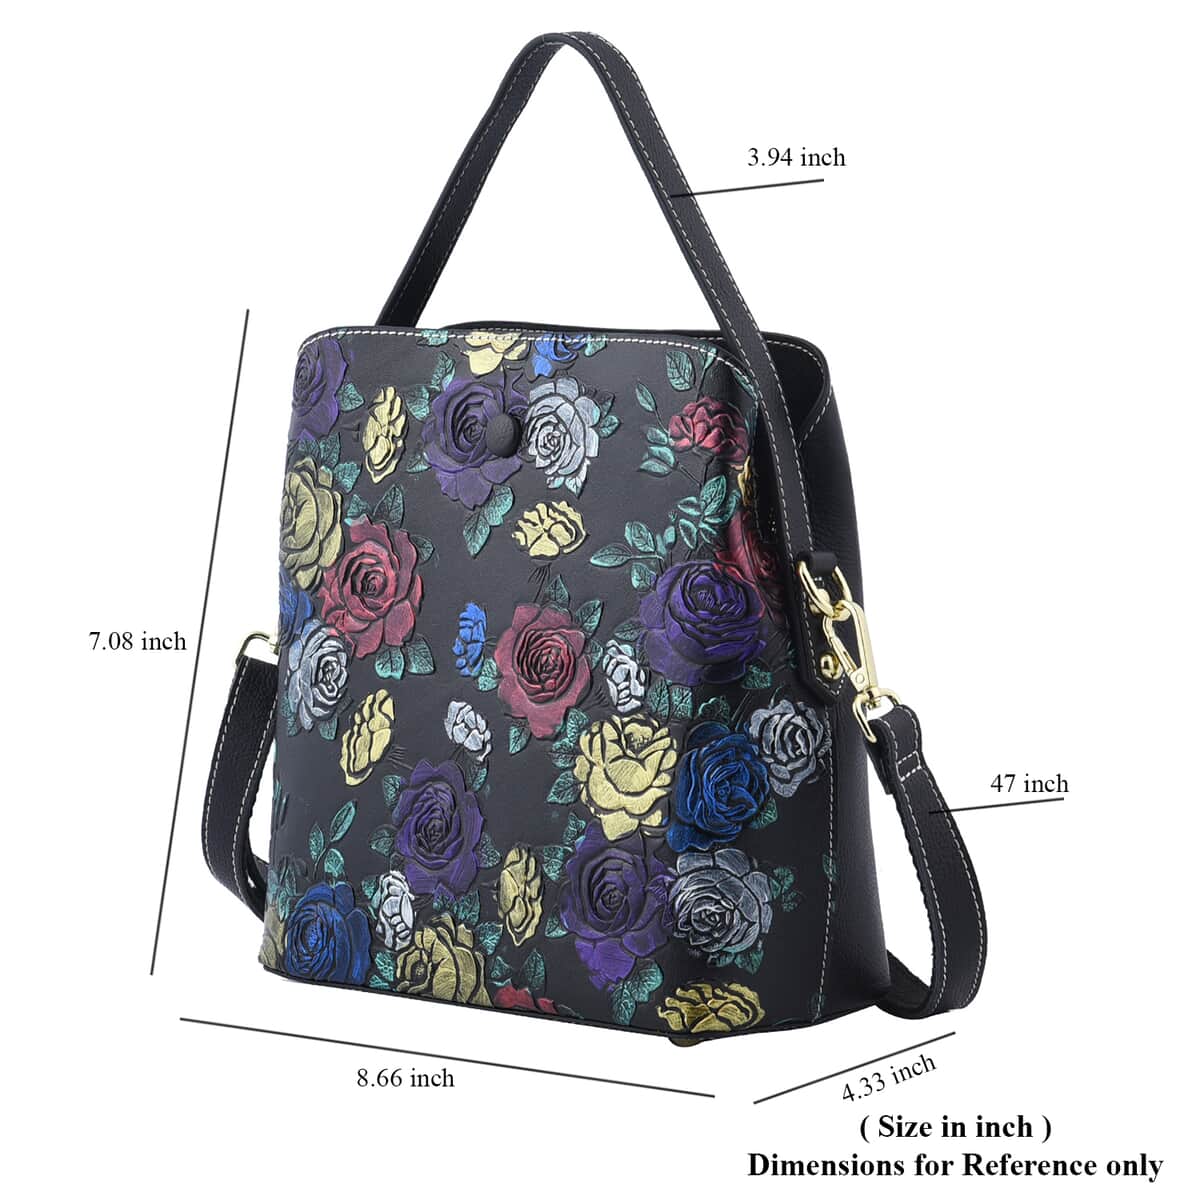 HONG KONG CLOSEOUT Collection Black Color Rose Embossed Pattern Genuine Leather Convertible Tote Bag with Handle and Shoulder Strap (8.66"x7.08"x4.33") image number 6